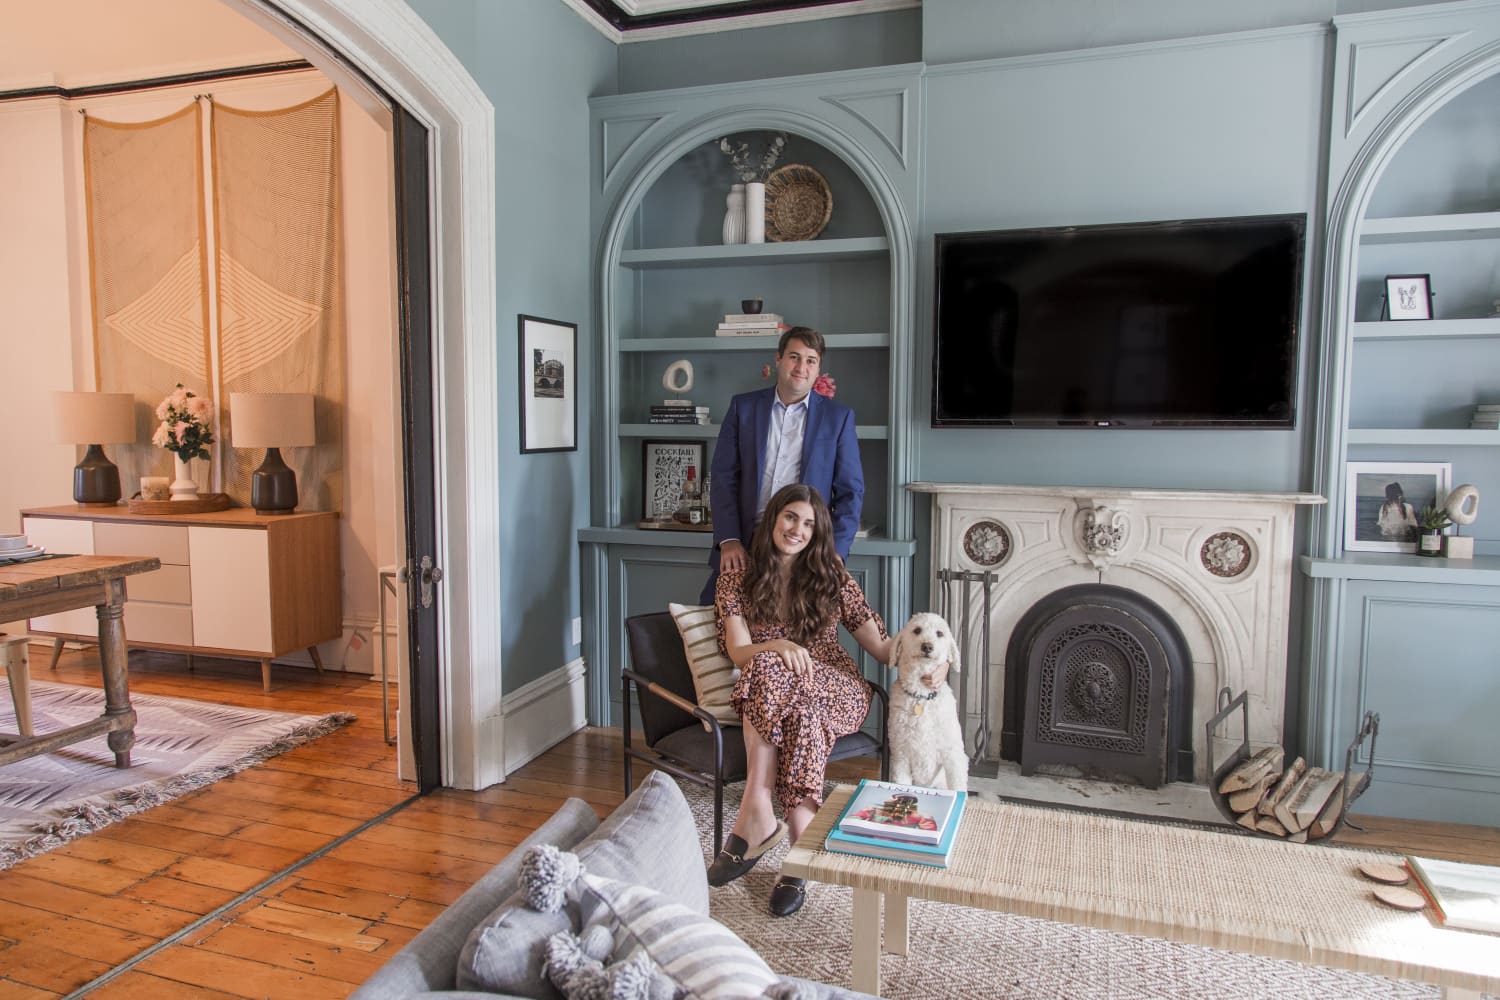 Chasing Paper's Co-Founder Lives in a Gorgeous, Colorful, Patterned House